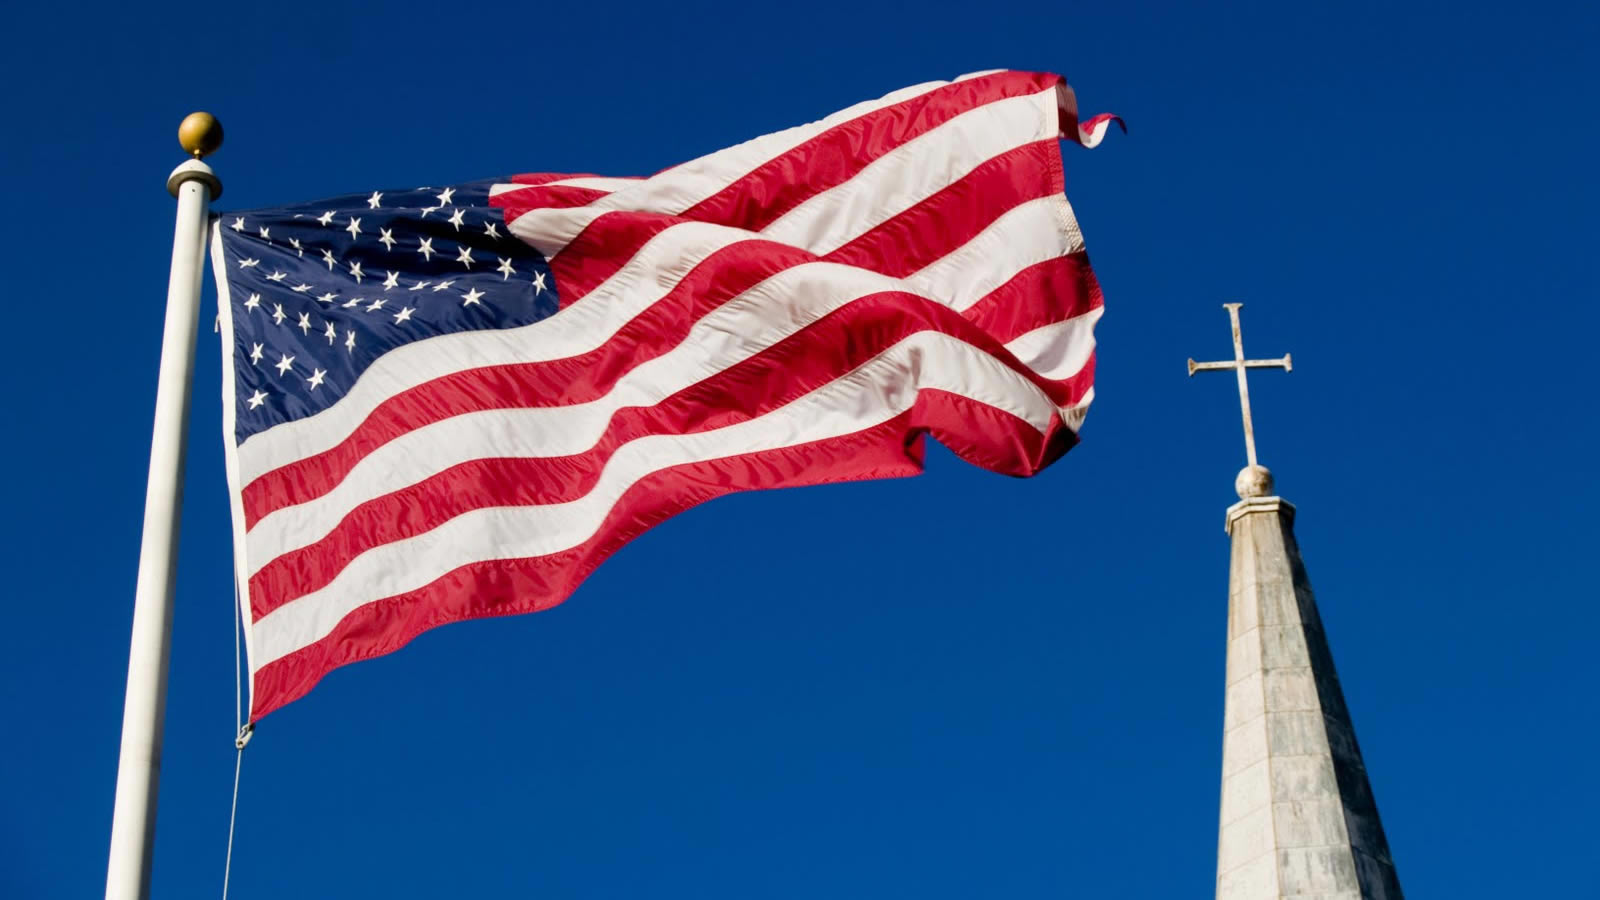 Religion and Politics Play in the United States?